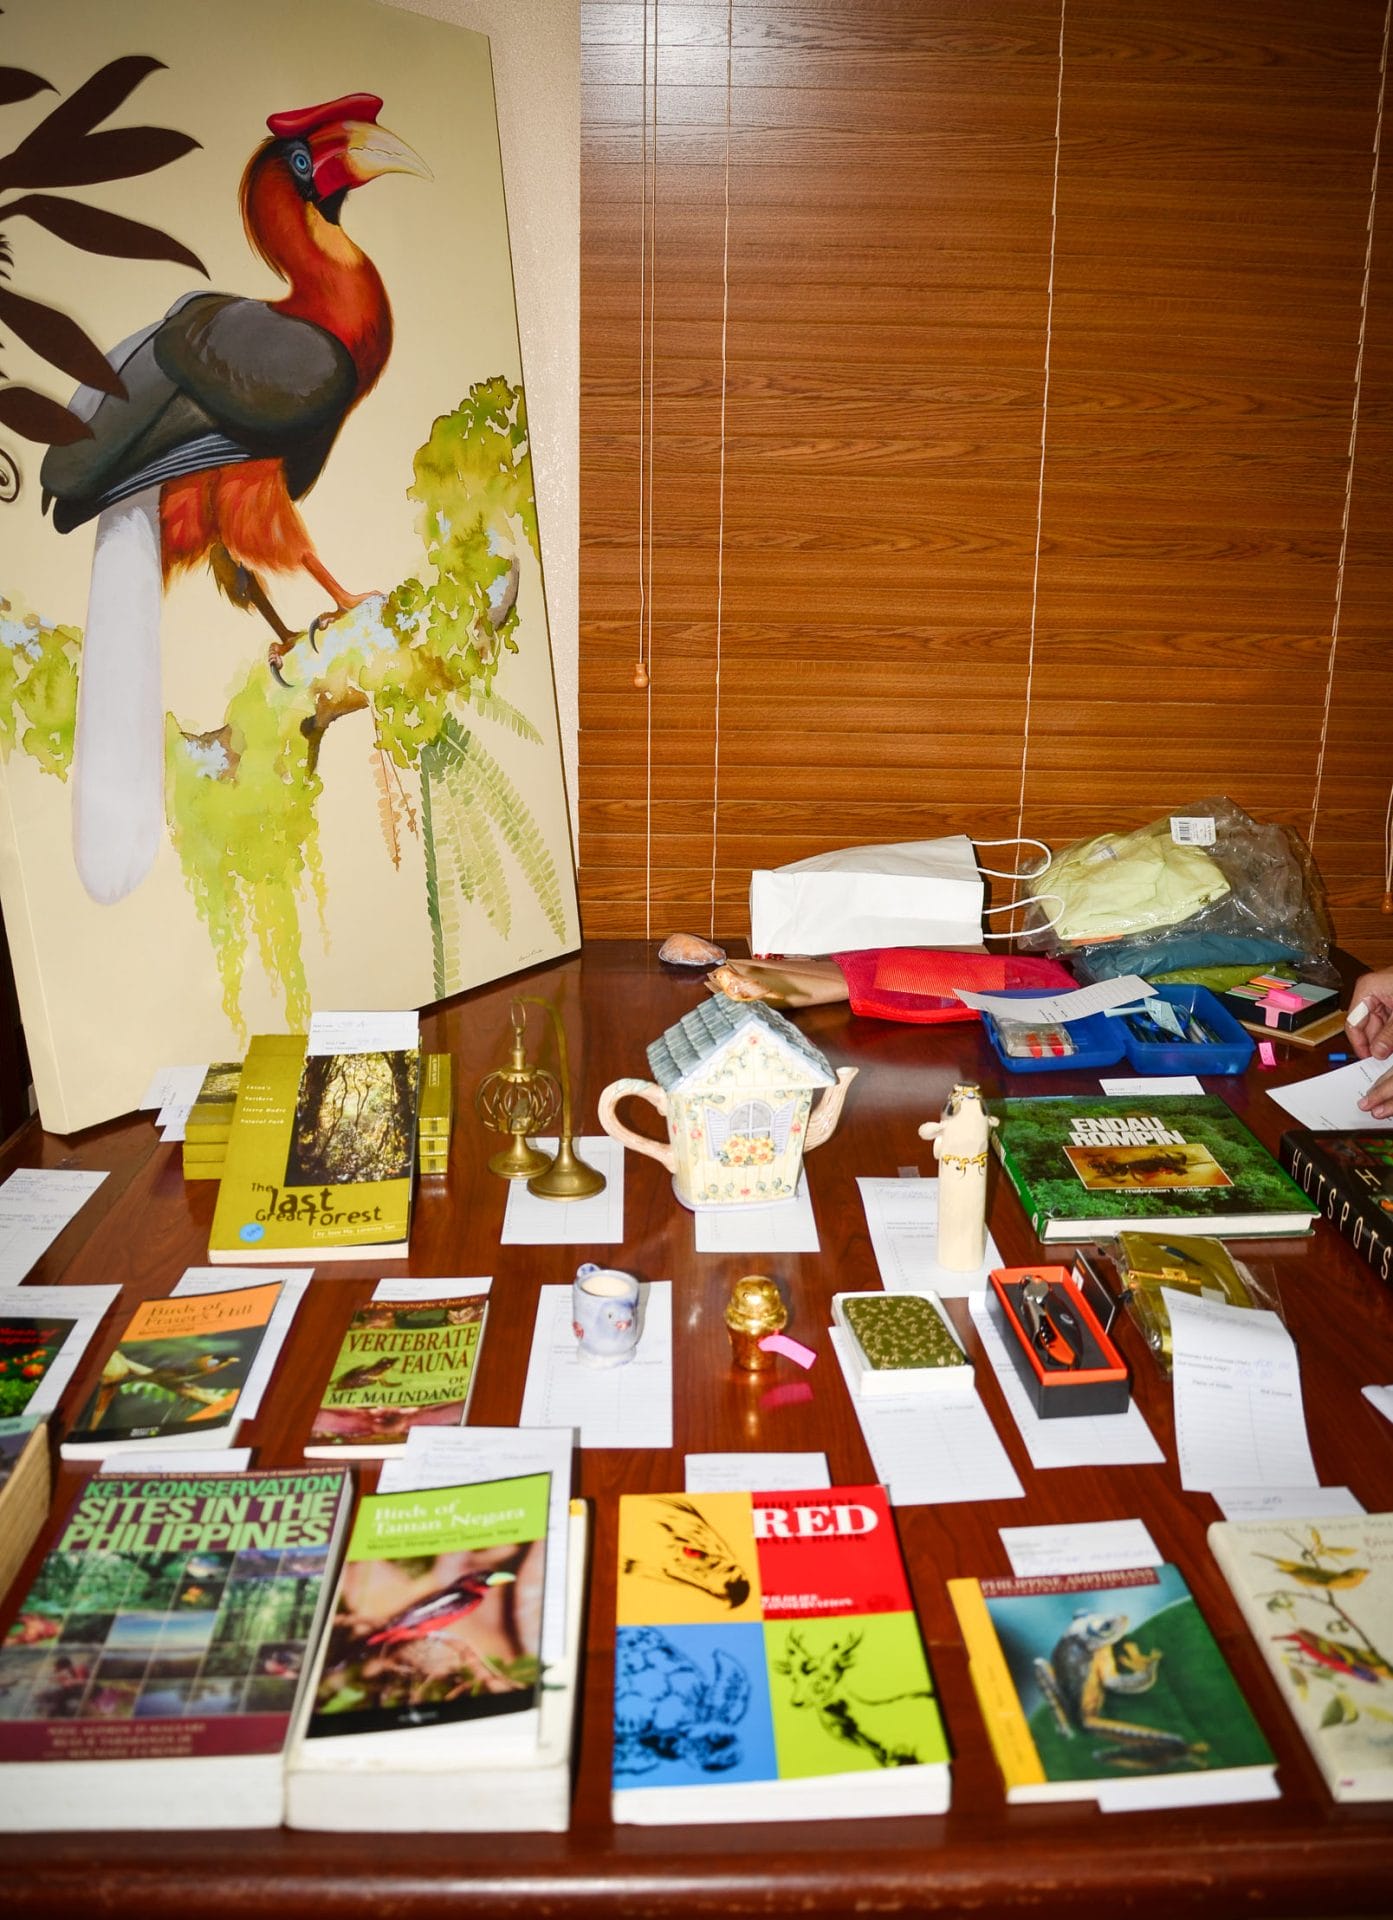 A Hornbill painting, array of books and other items showcased at the Silent Auction area. Photo by Marites Falcon.